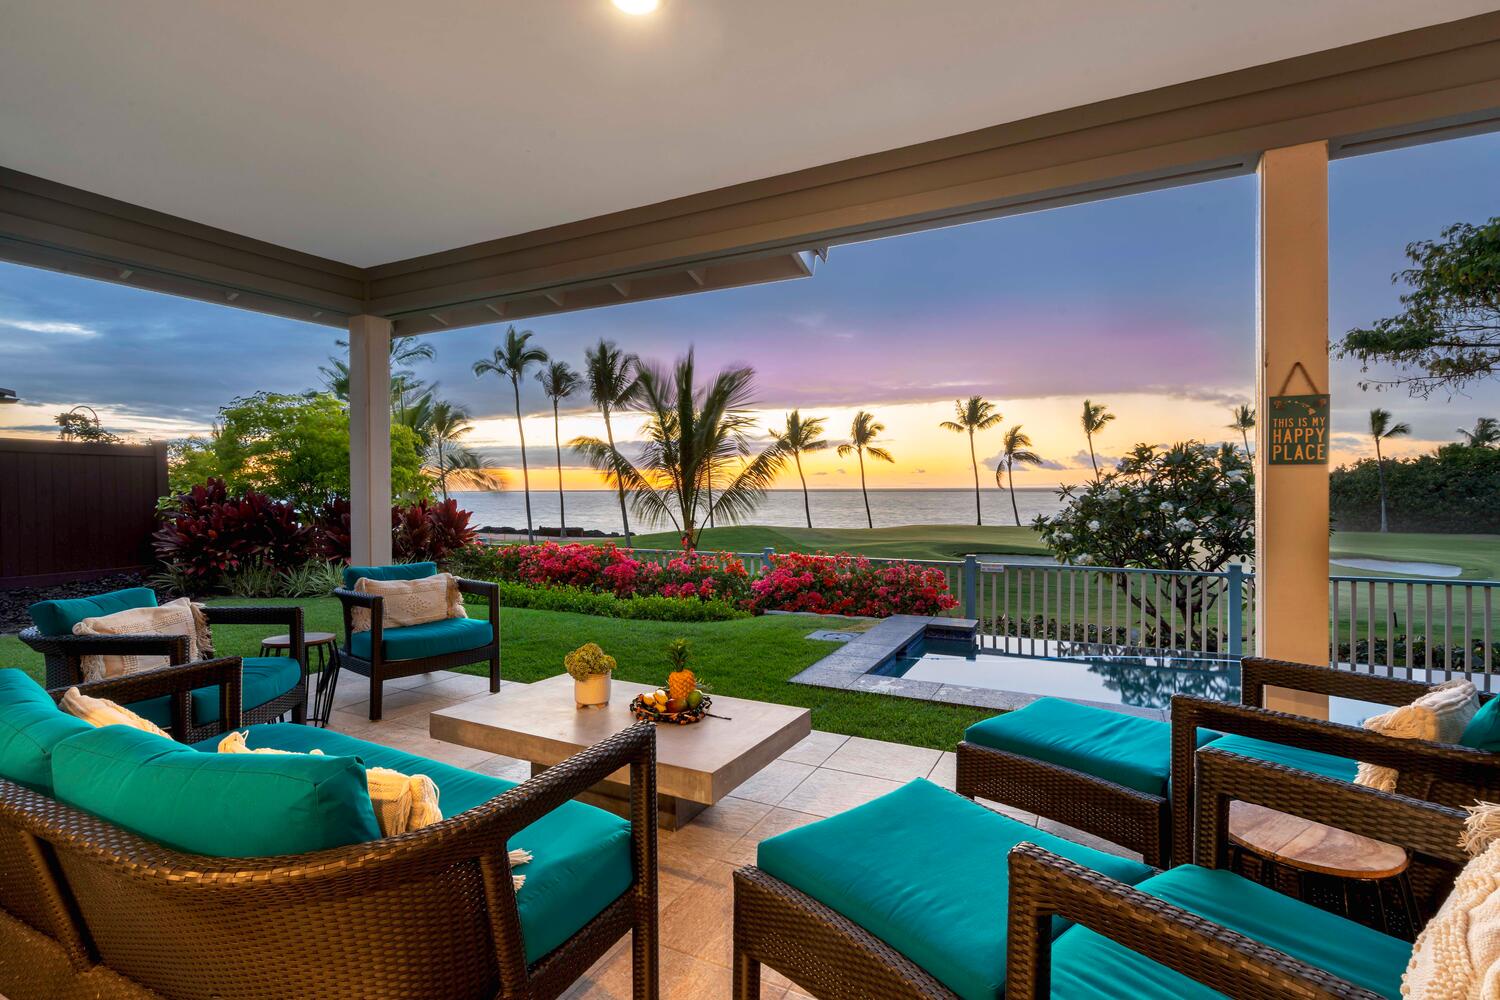 Kailua-Kona Vacation Rentals, Holua Kai #26 - Luxurious patio with vibrant furniture and a breathtaking oceanfront view at dusk.